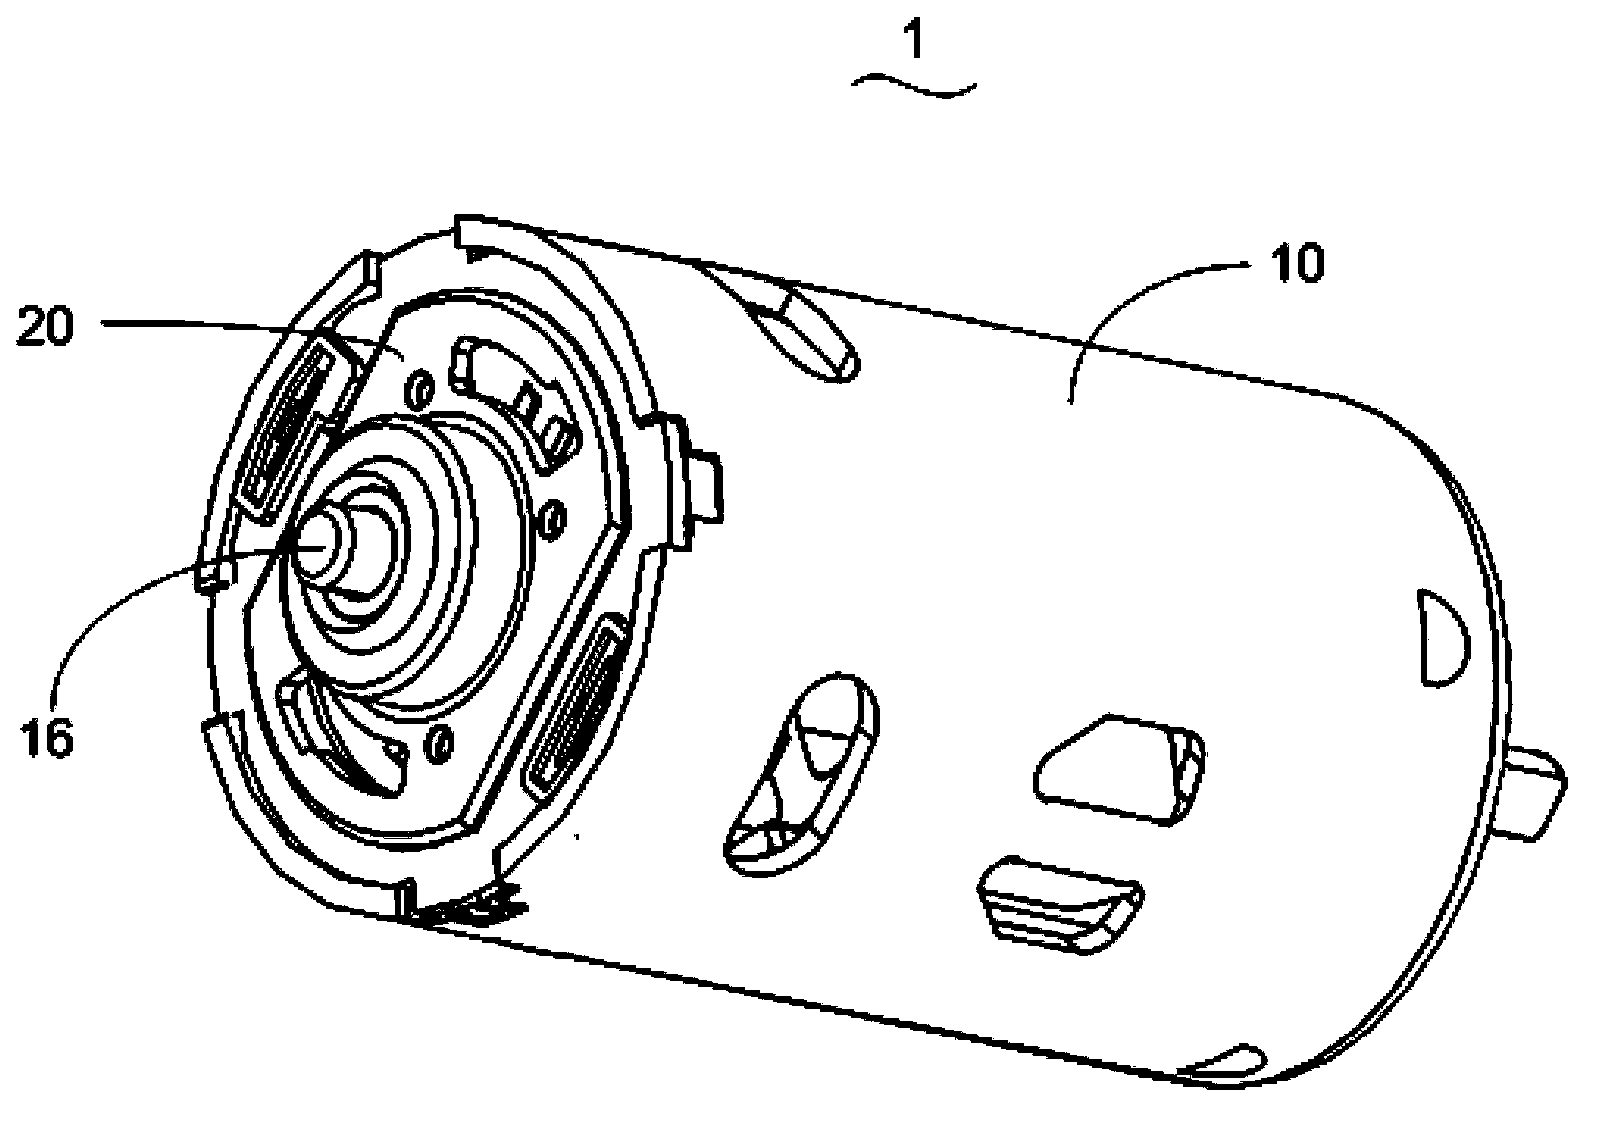 Motor and end cover component of motor